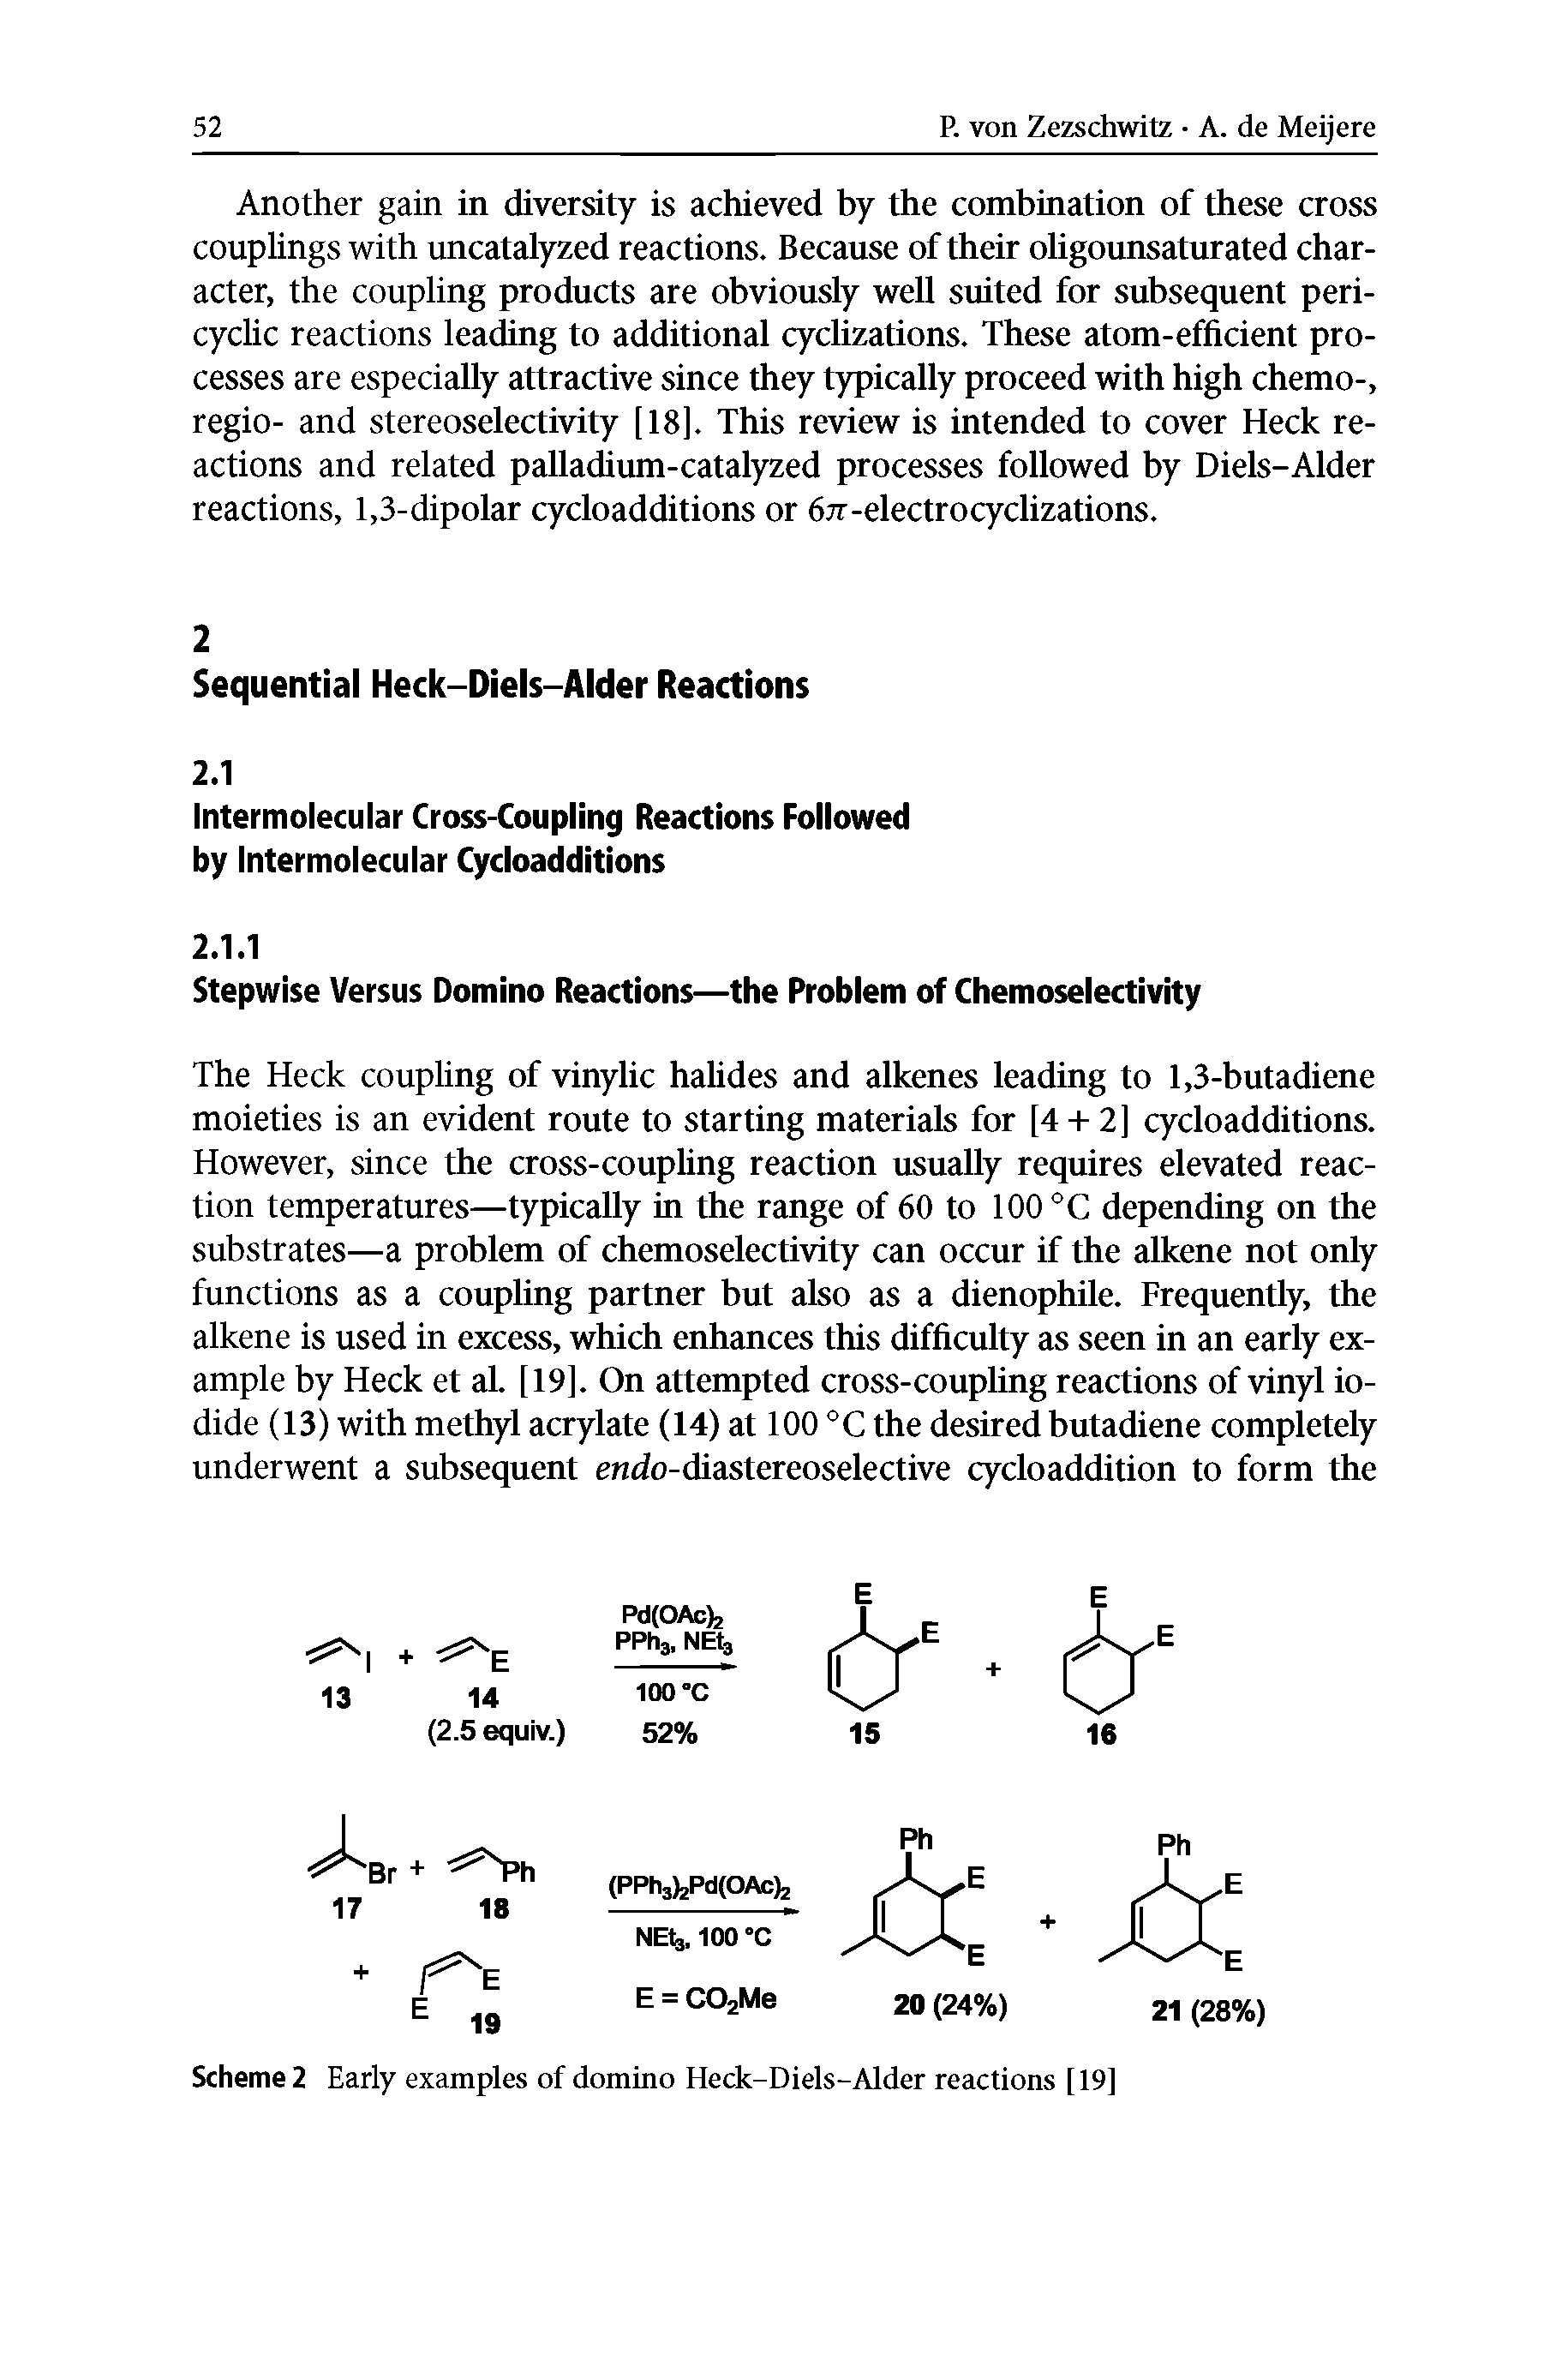 Scheme 2 Early examples of domino Heck-Diels-Alder reactions [19]...